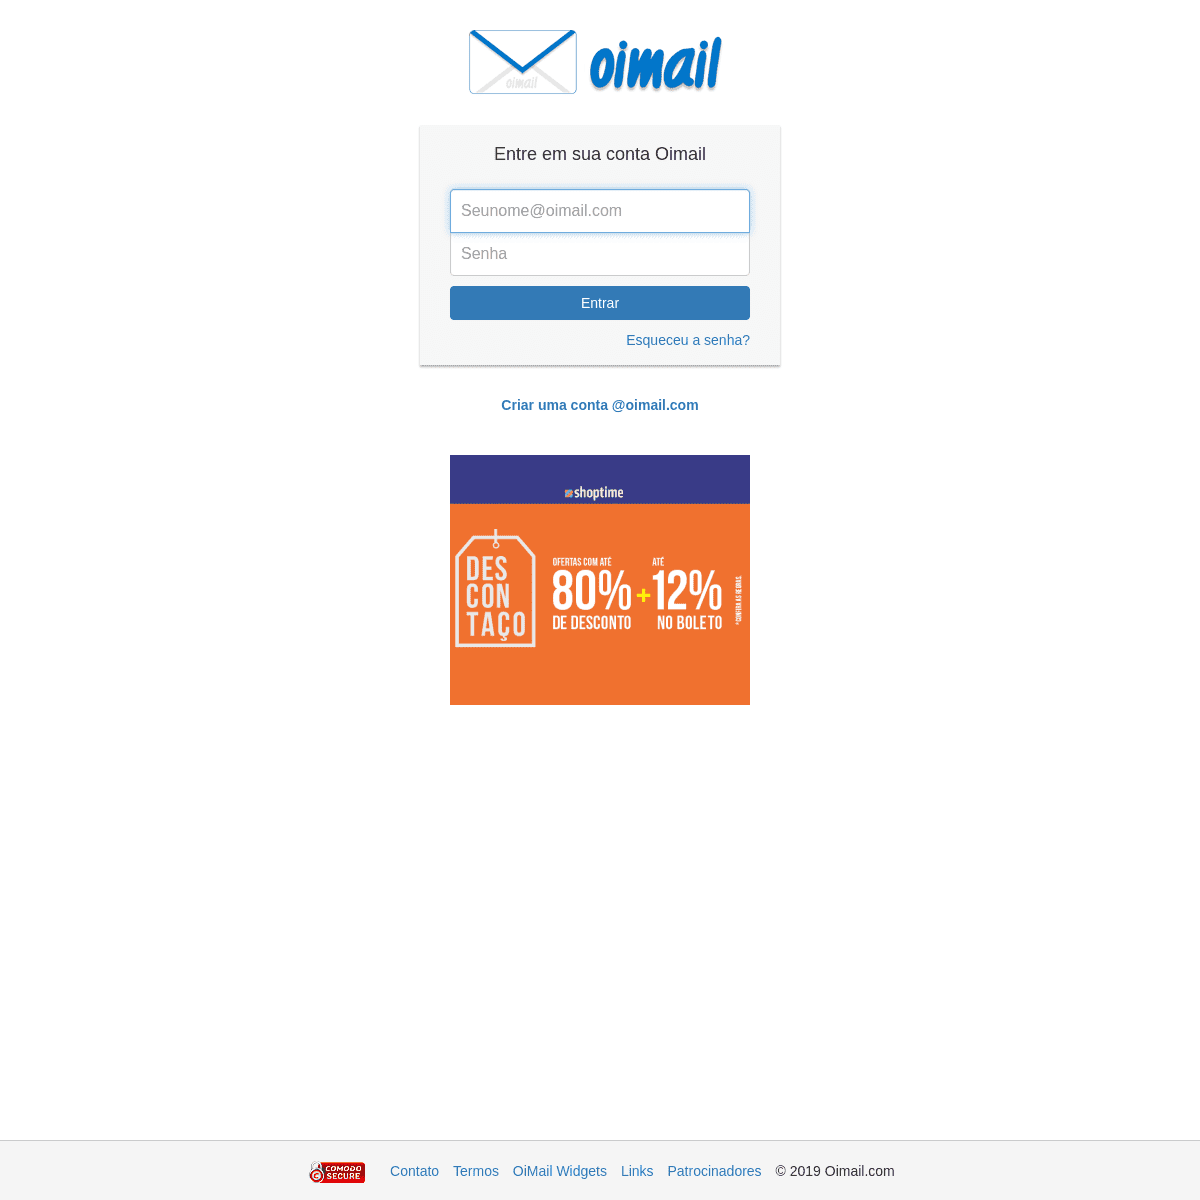 A complete backup of oimail.com